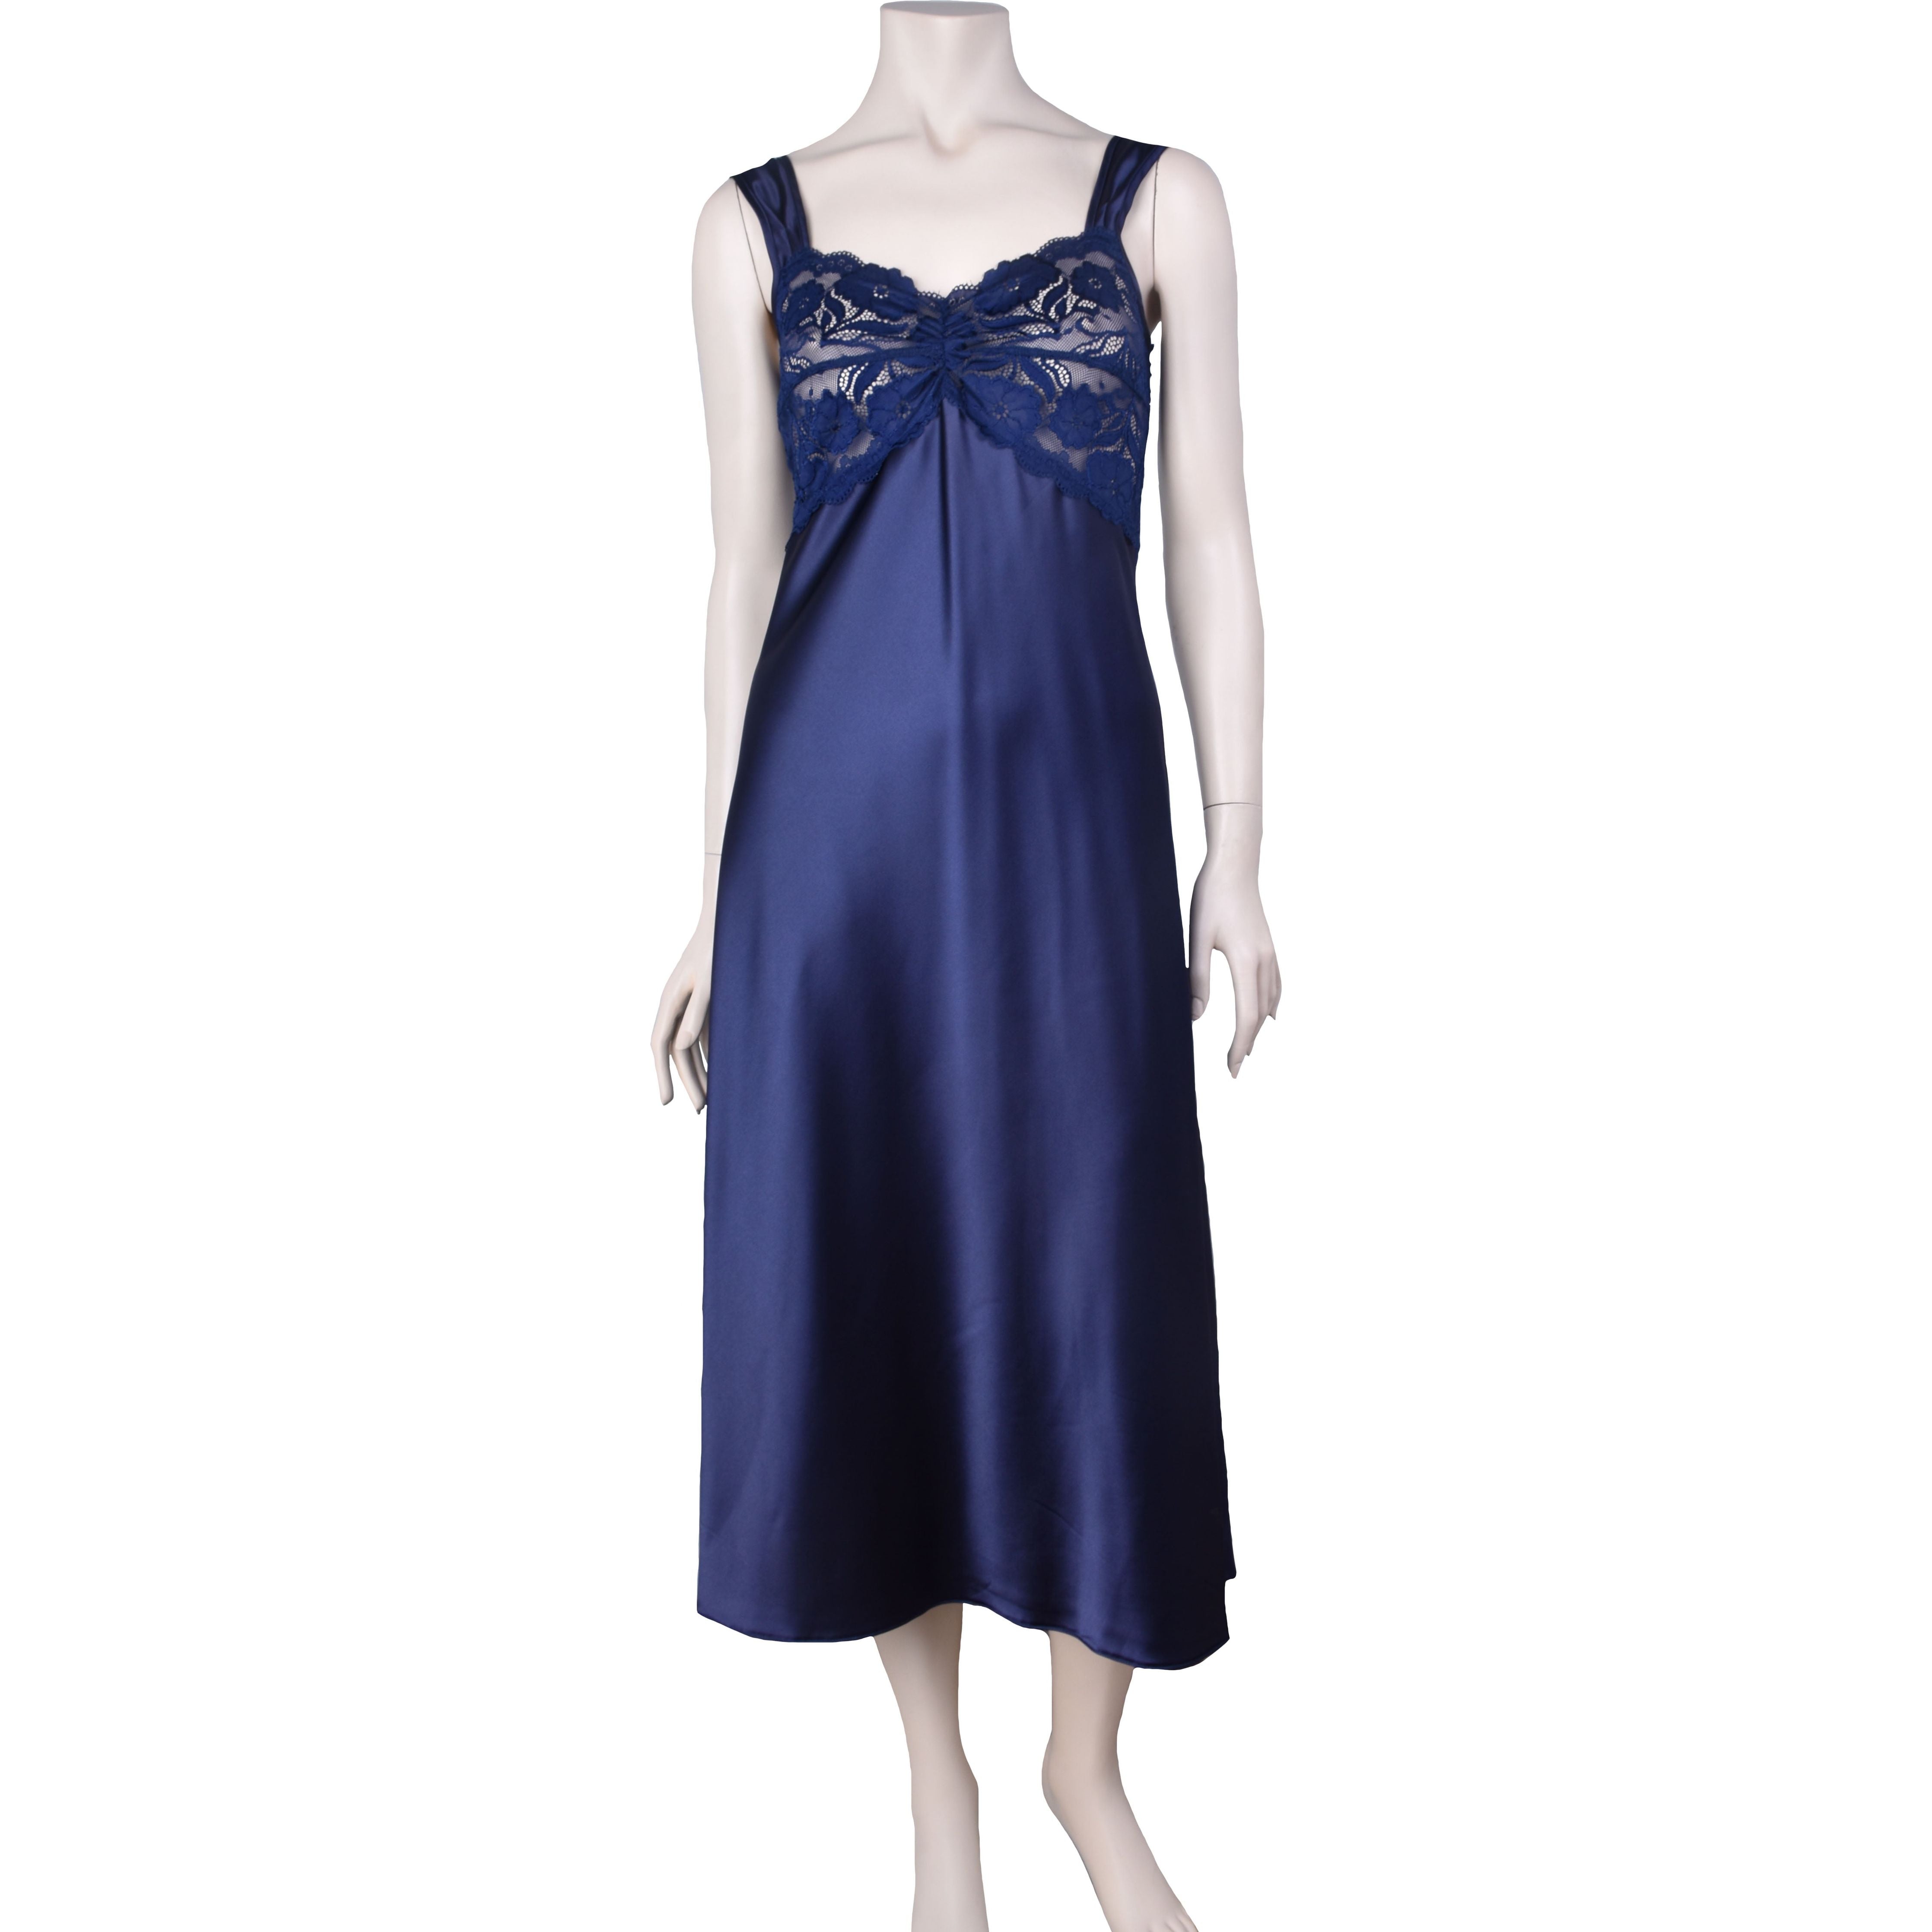 Lace Bodice Nightgown 610NGS